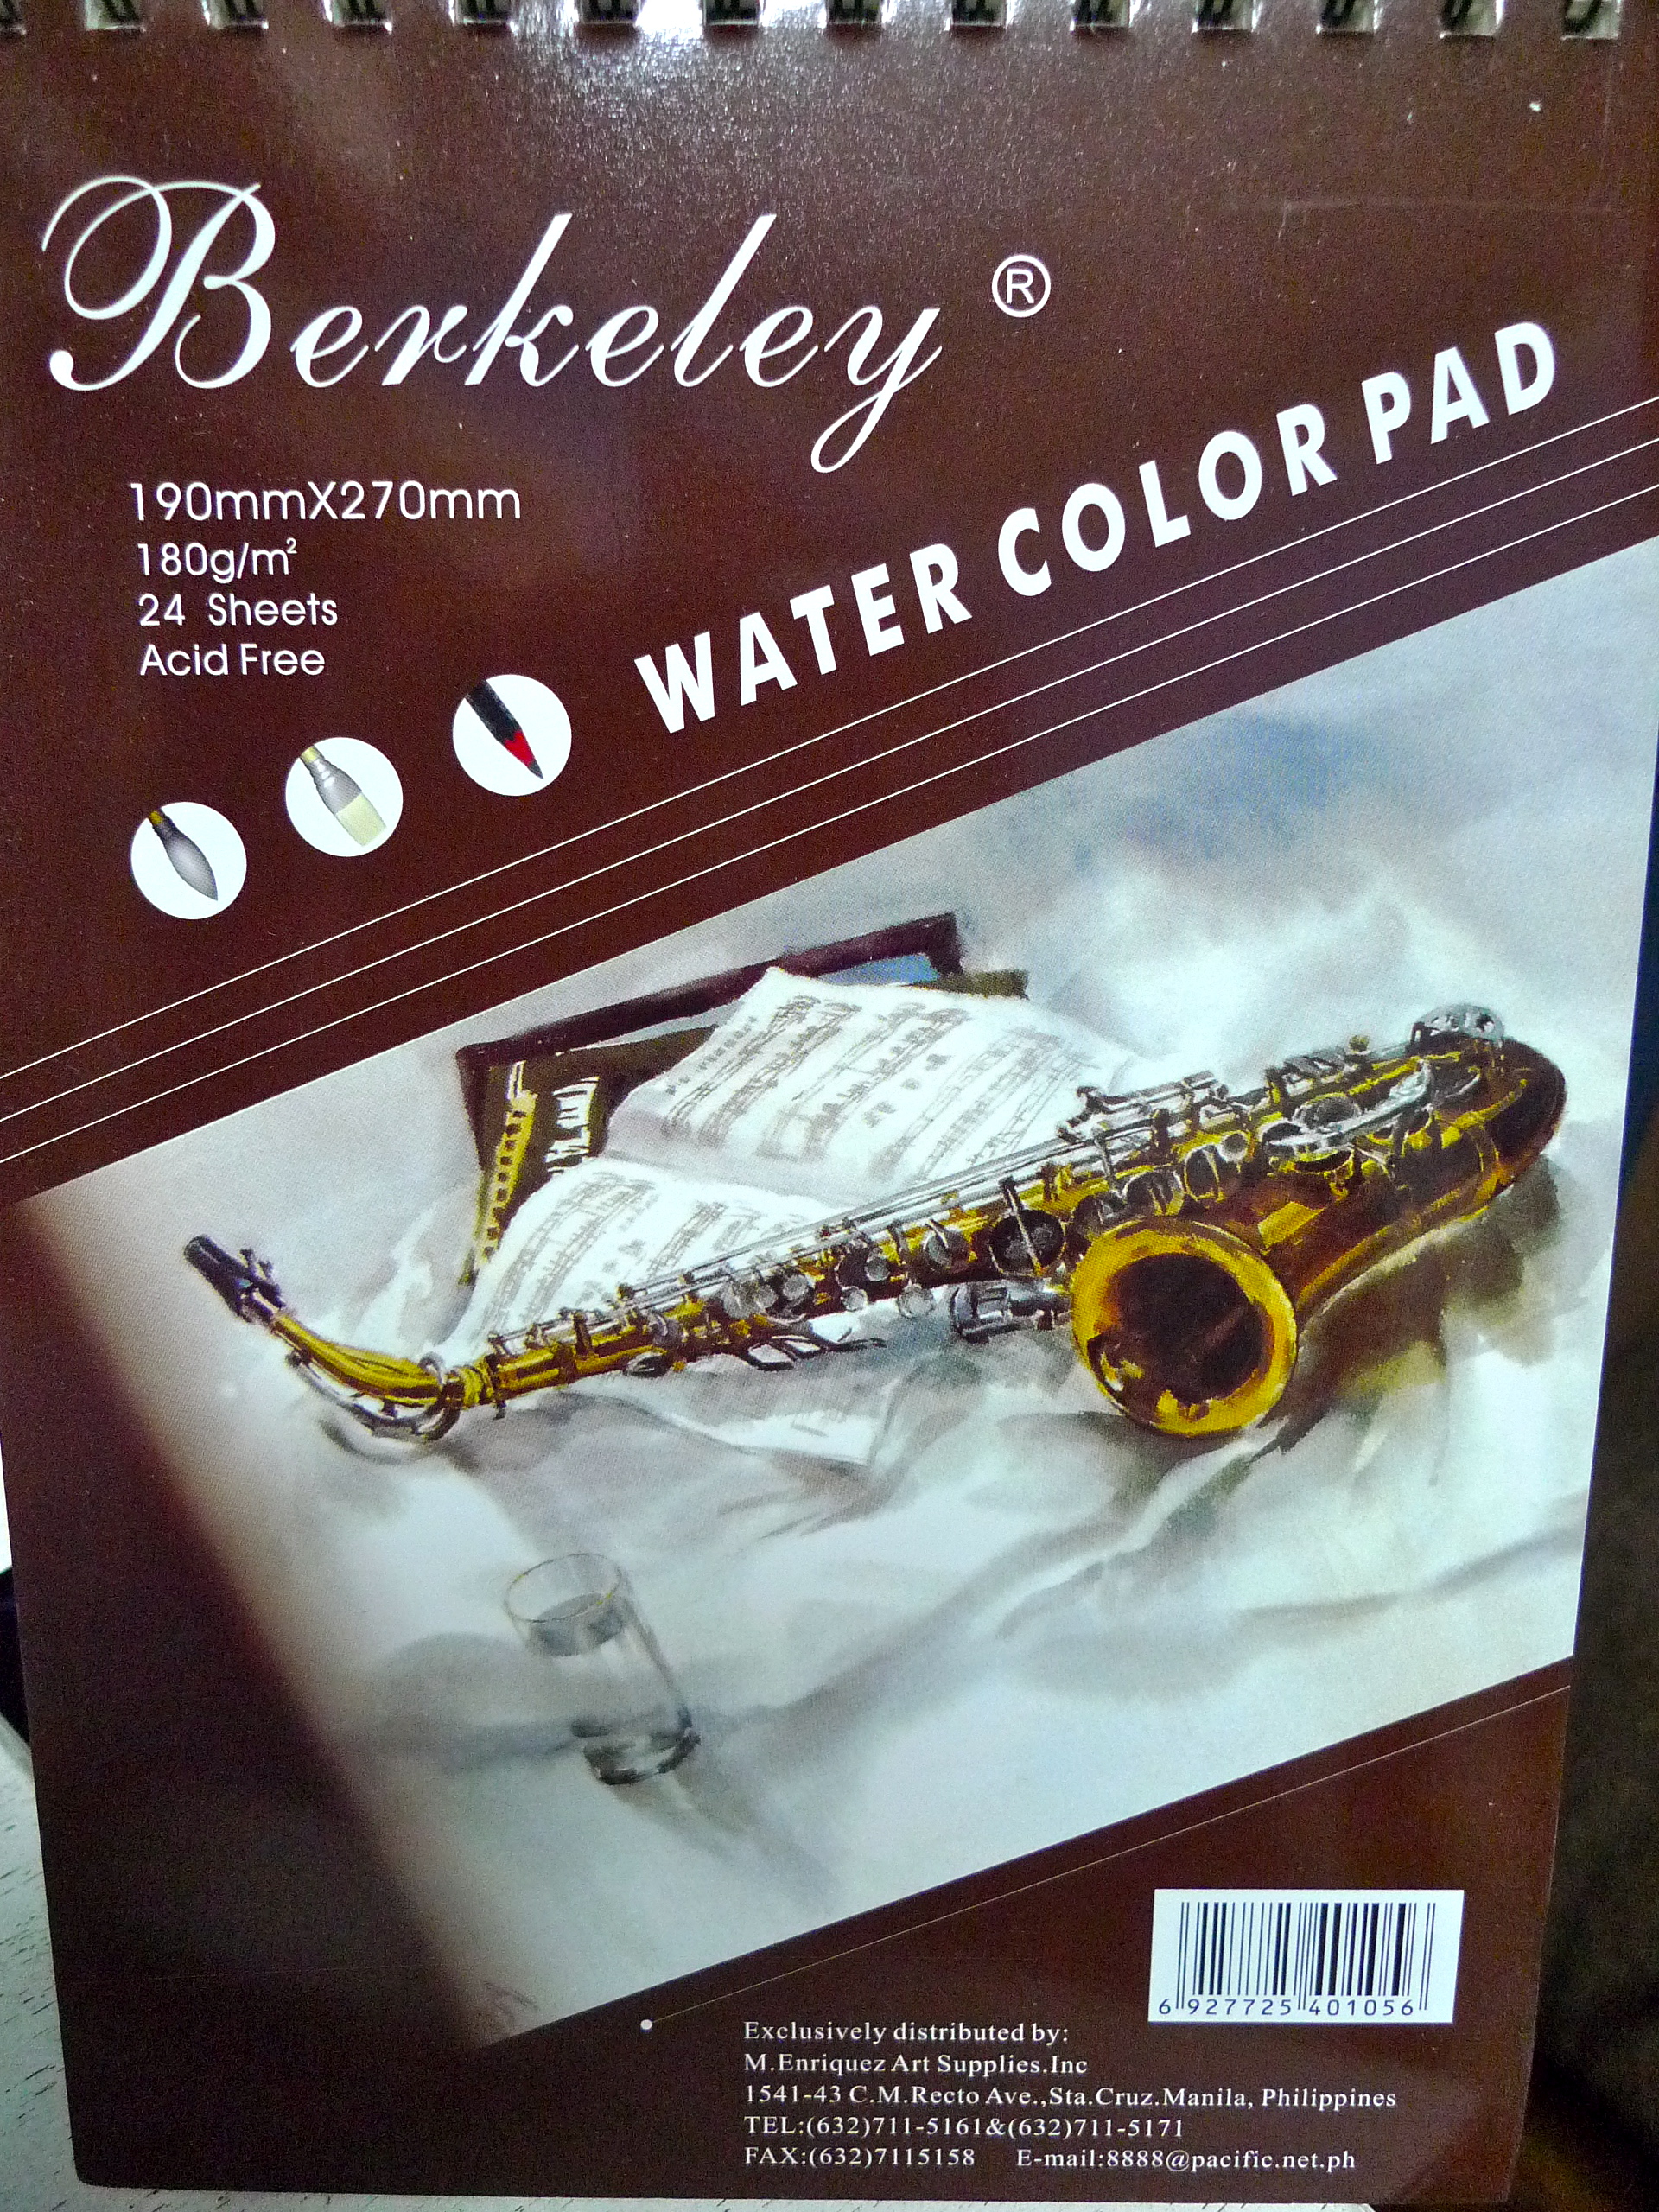 This began as a review of the Berkeley watercolor pad. – Leigh